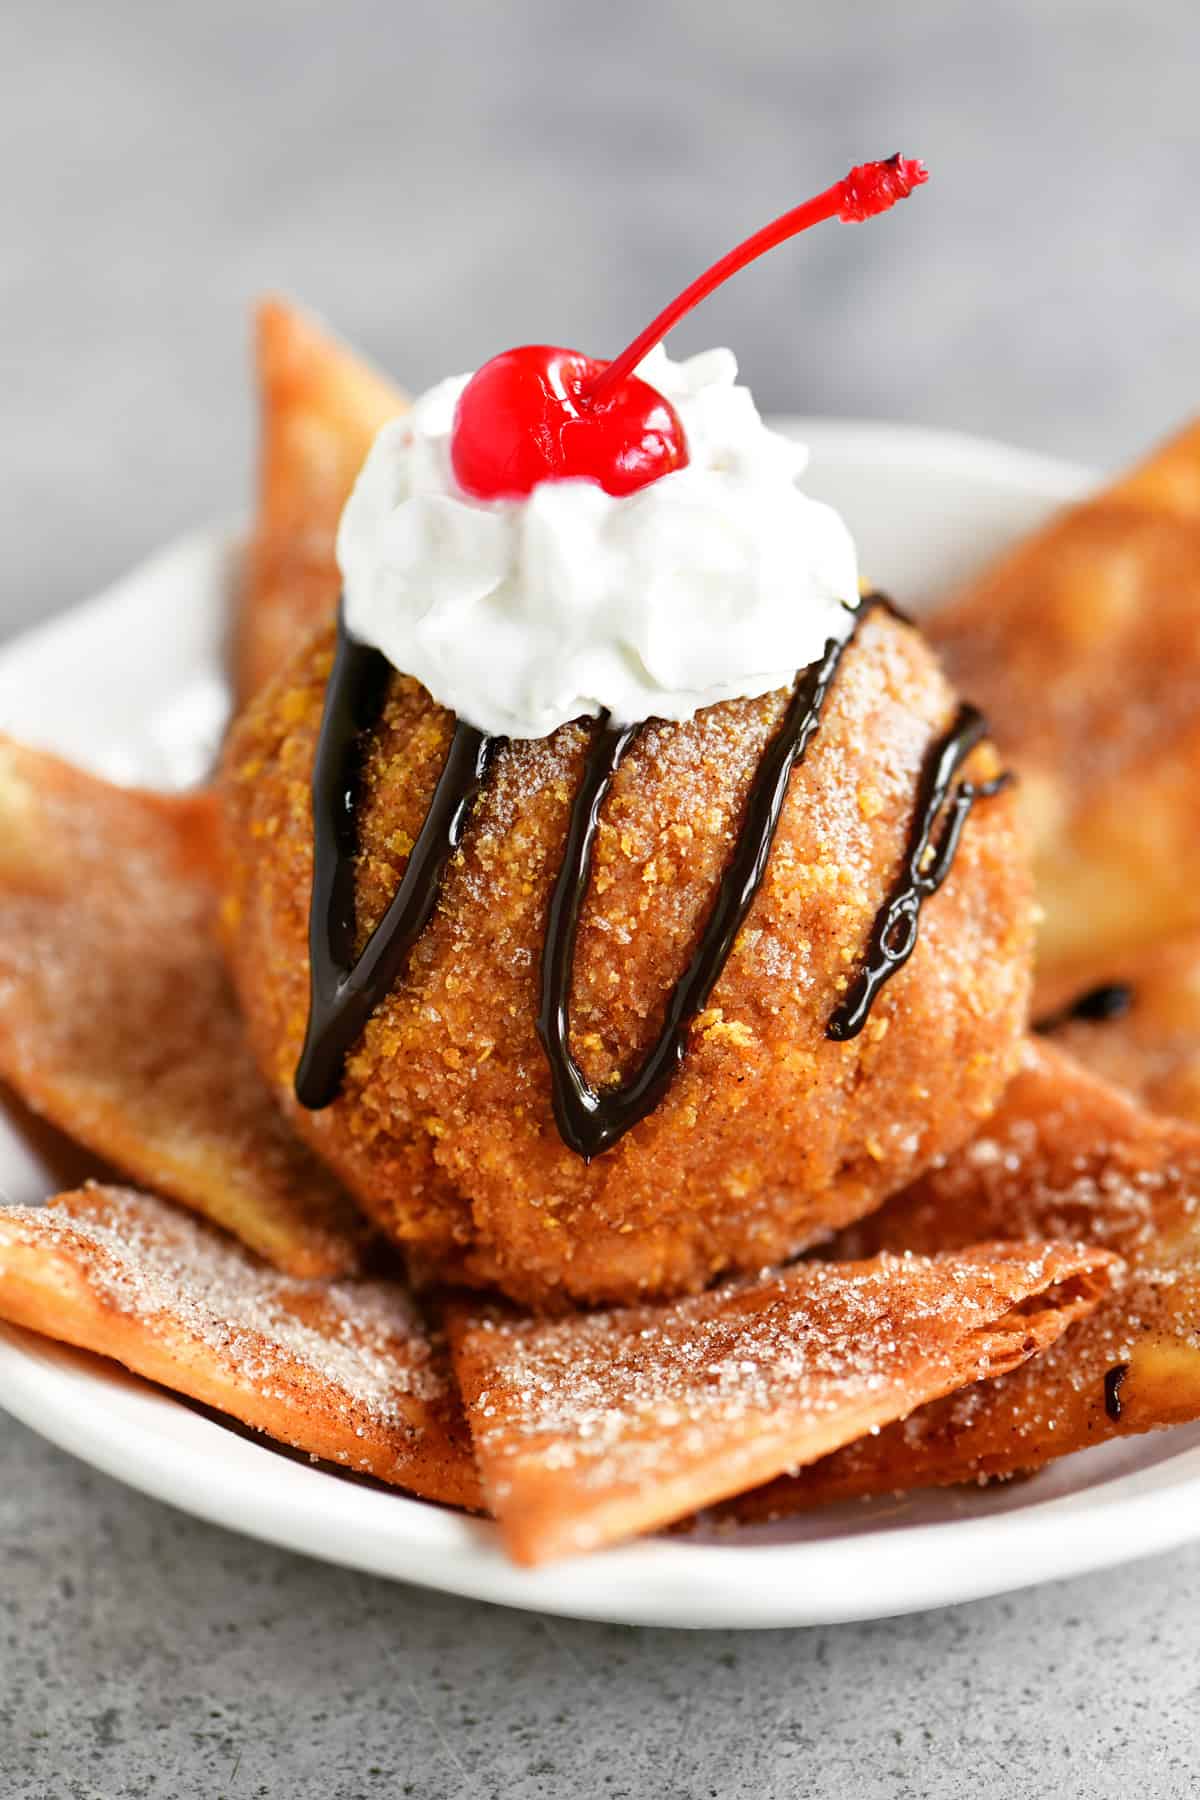 delicious fried ice cream dessert with a cherry on top